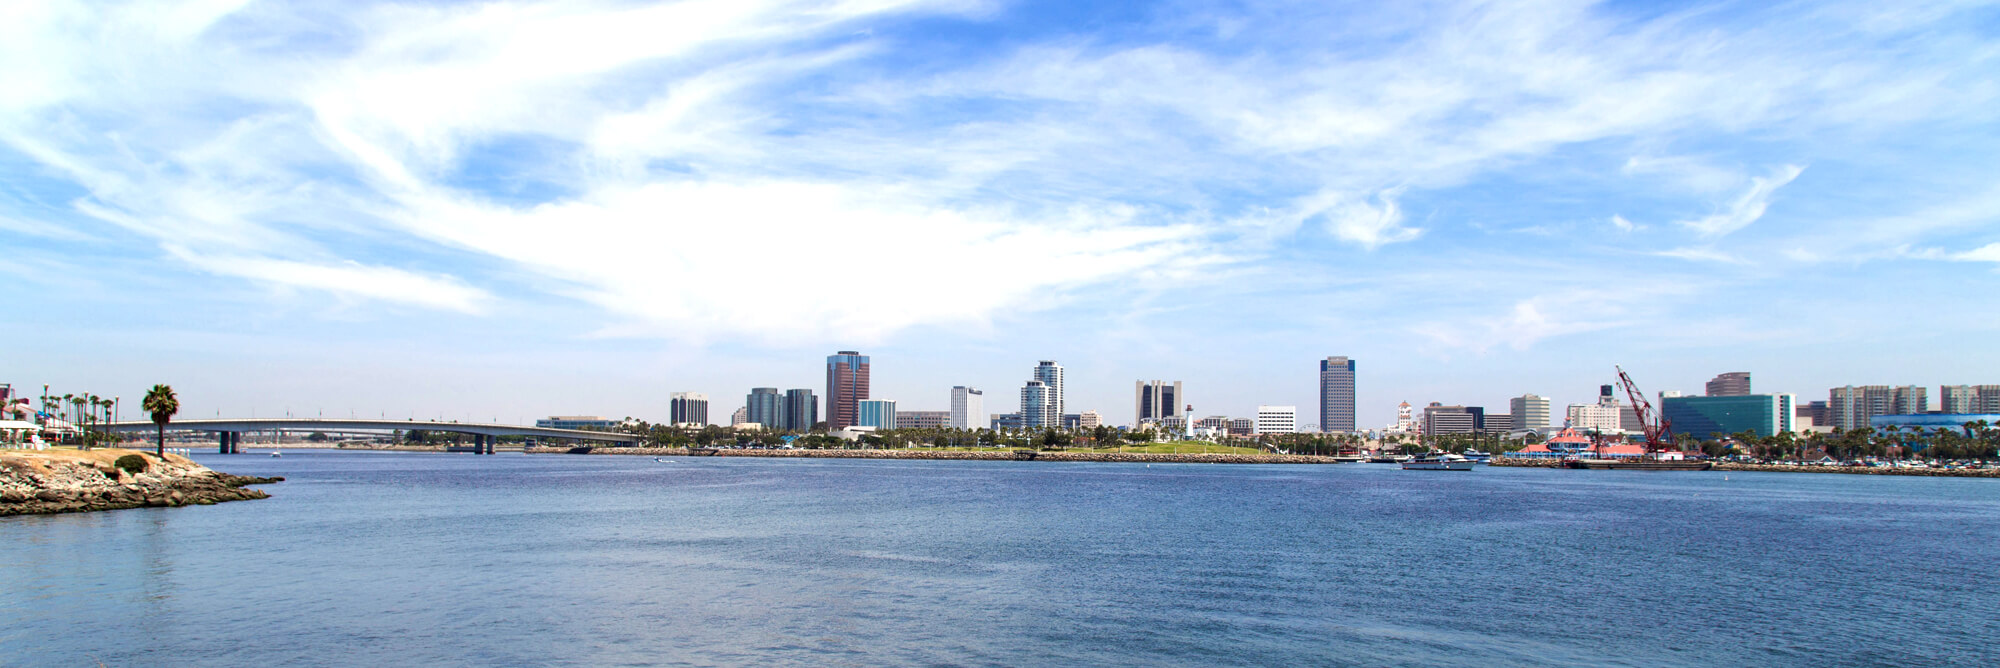 A wide panoramic view of Long Beach and a bridge